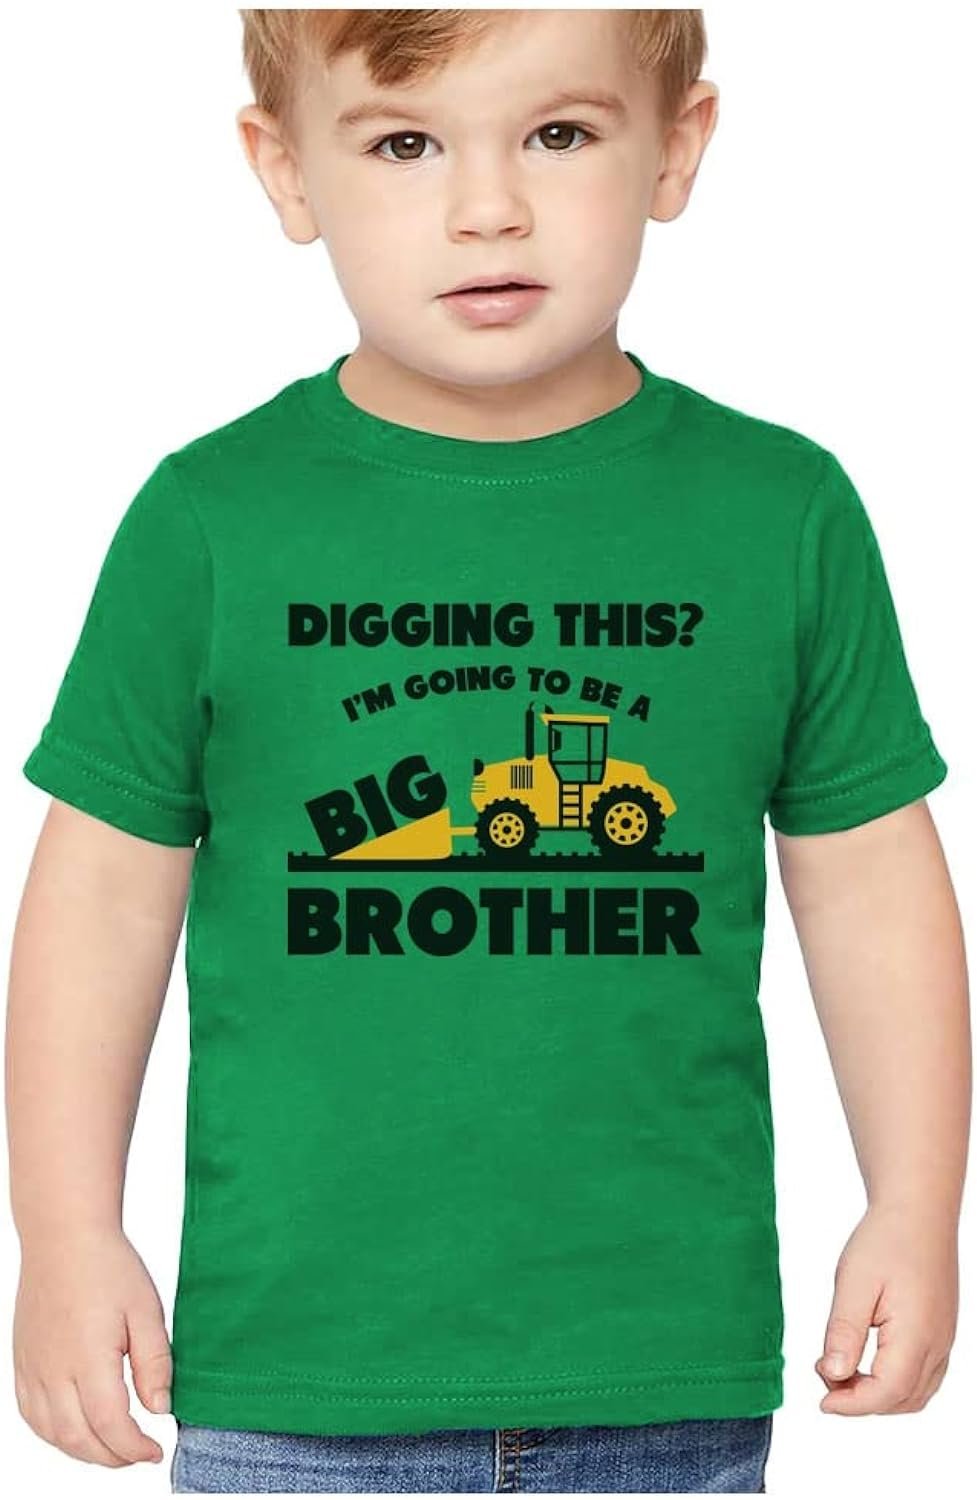 Big Brother Shirt for Toddler Pregnancy Announcements Tractor Shirts for Boys